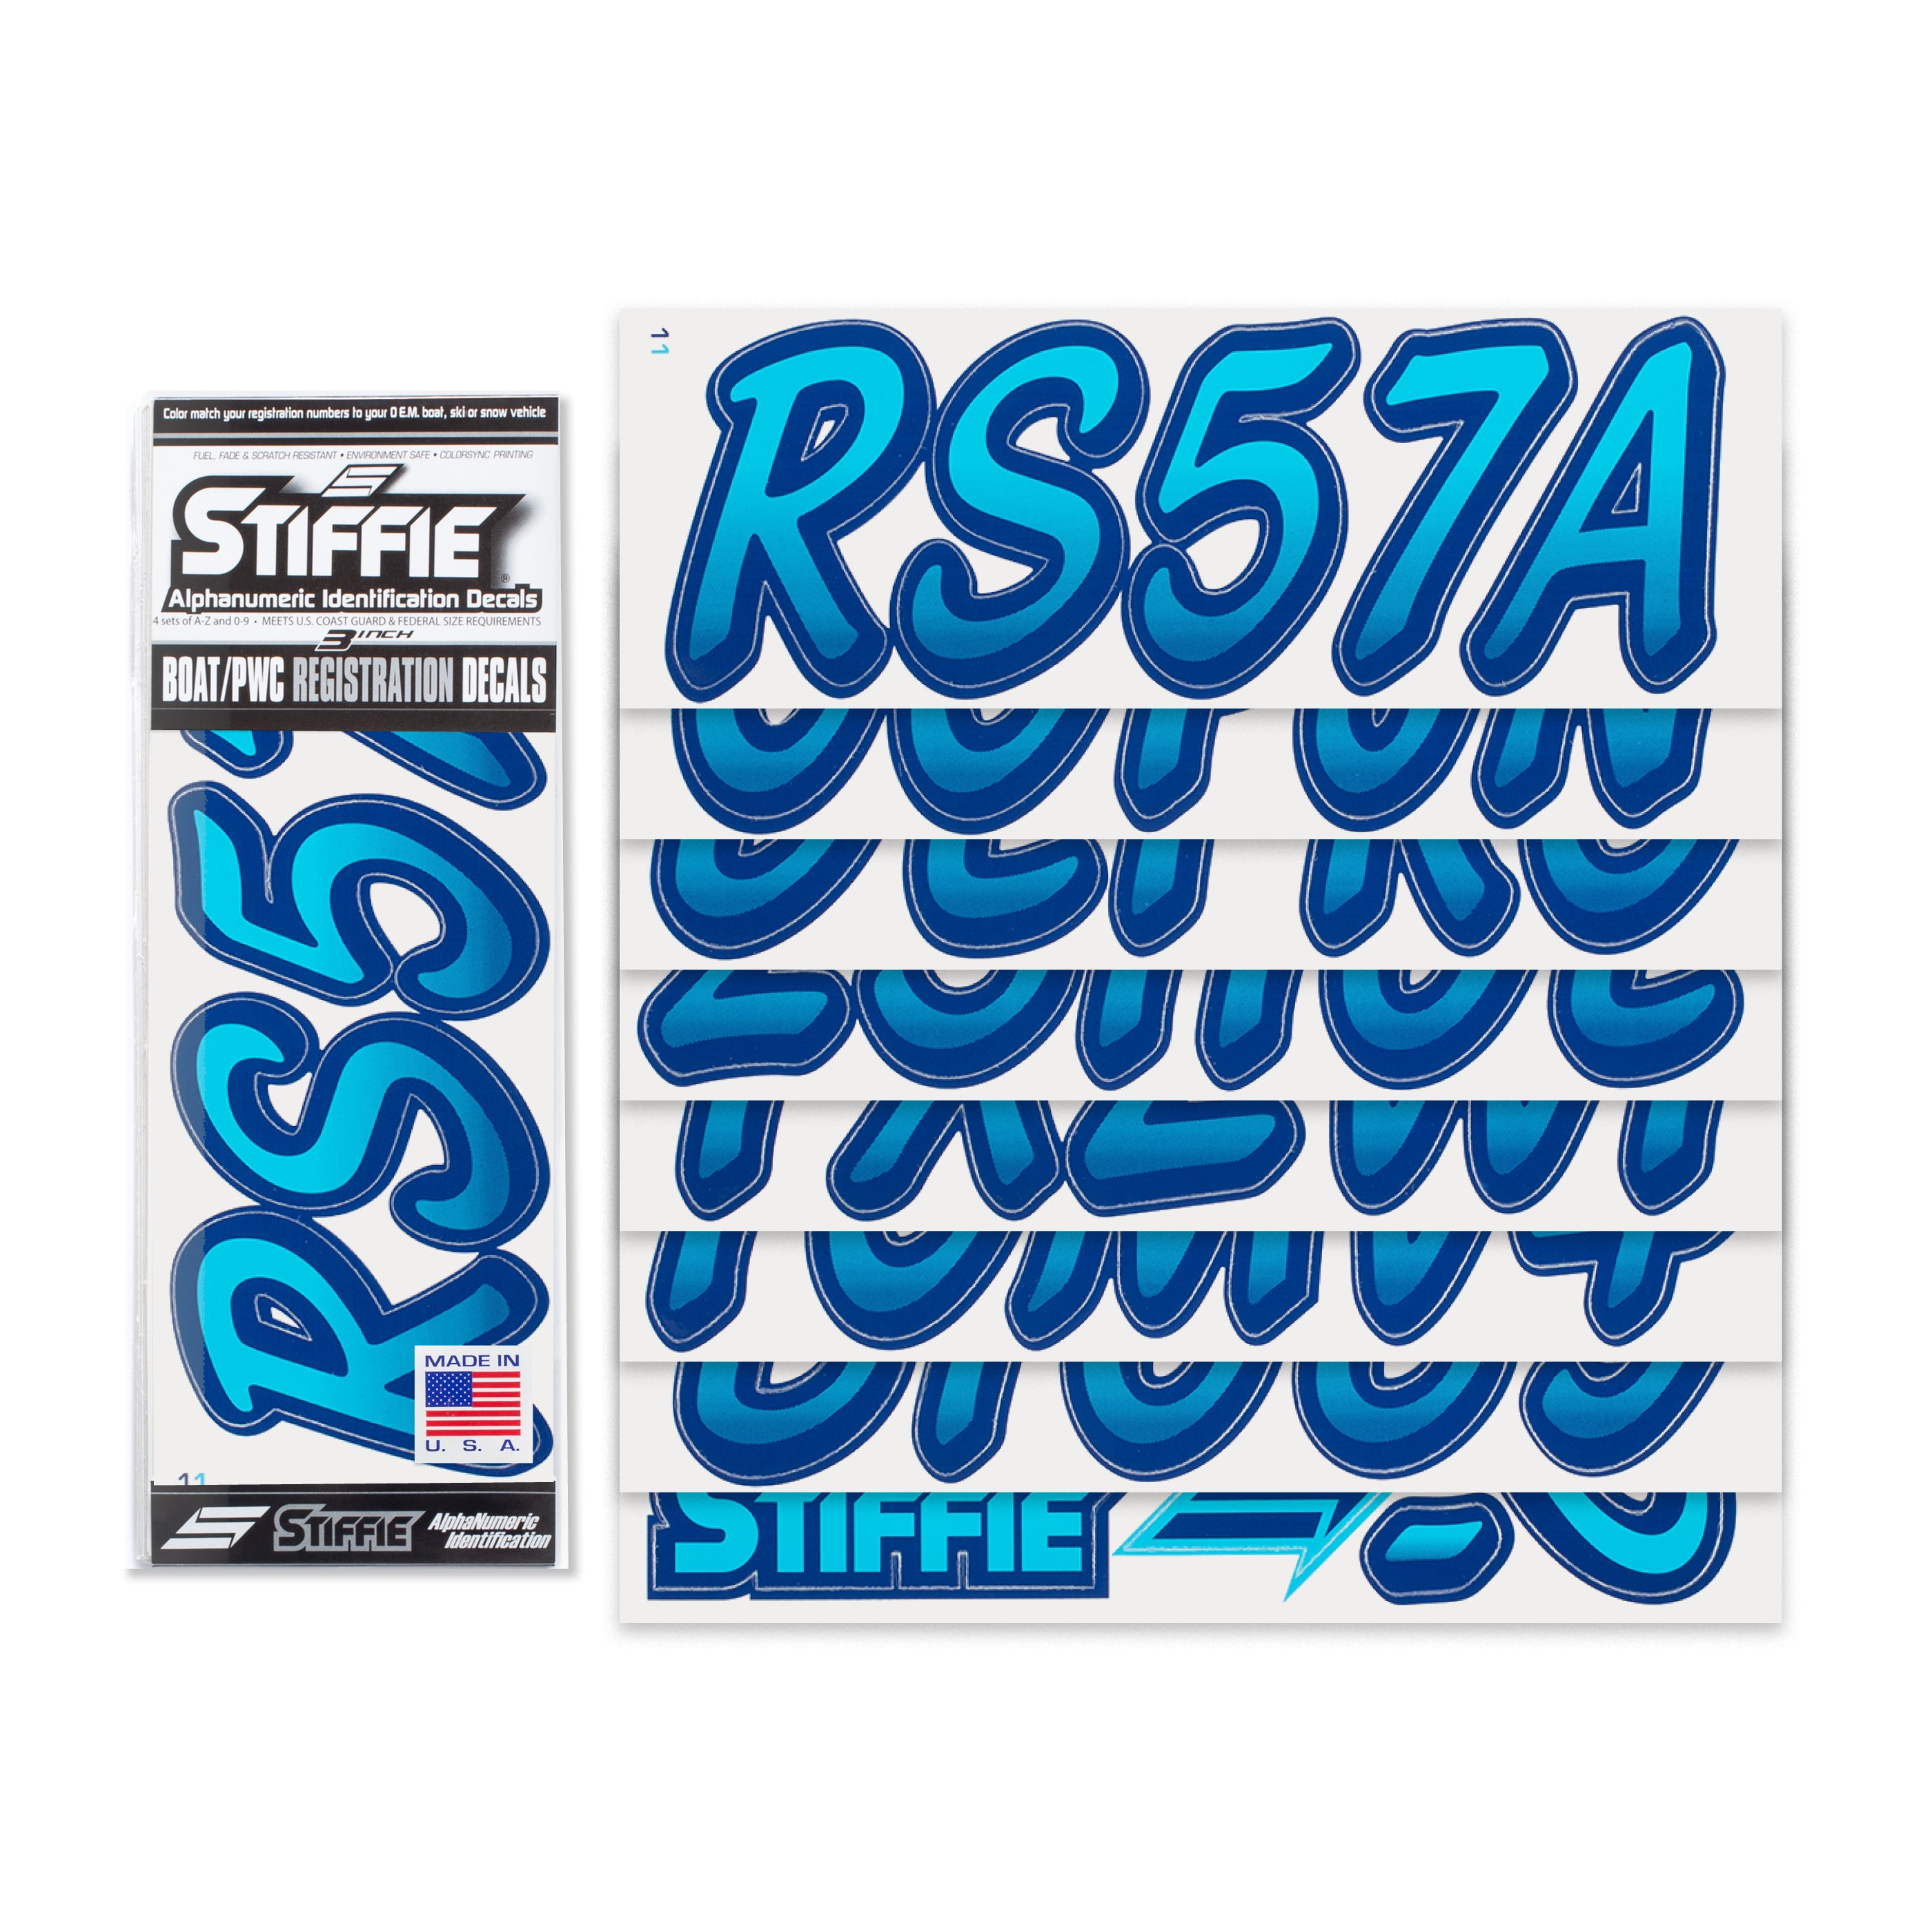 STIFFIE Whipline Sky Blue/Navy 3" Alpha-Numeric Registration Identification Numbers Stickers Decals for Boats & Personal Watercraft